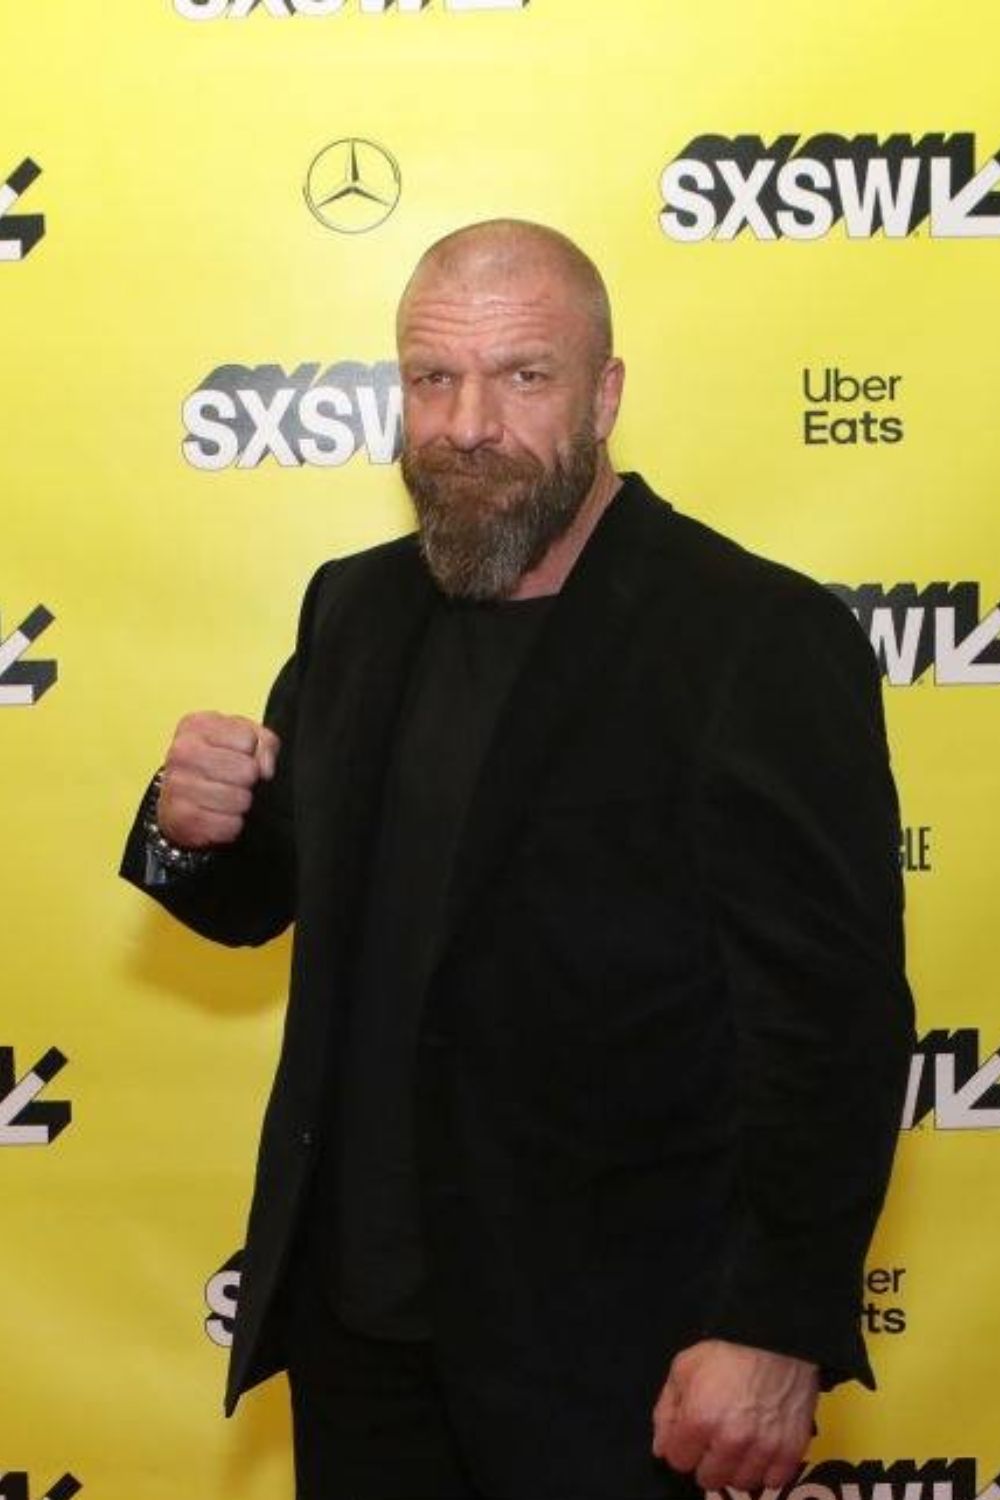 Triple H Is The Chief Content Officer For WWE